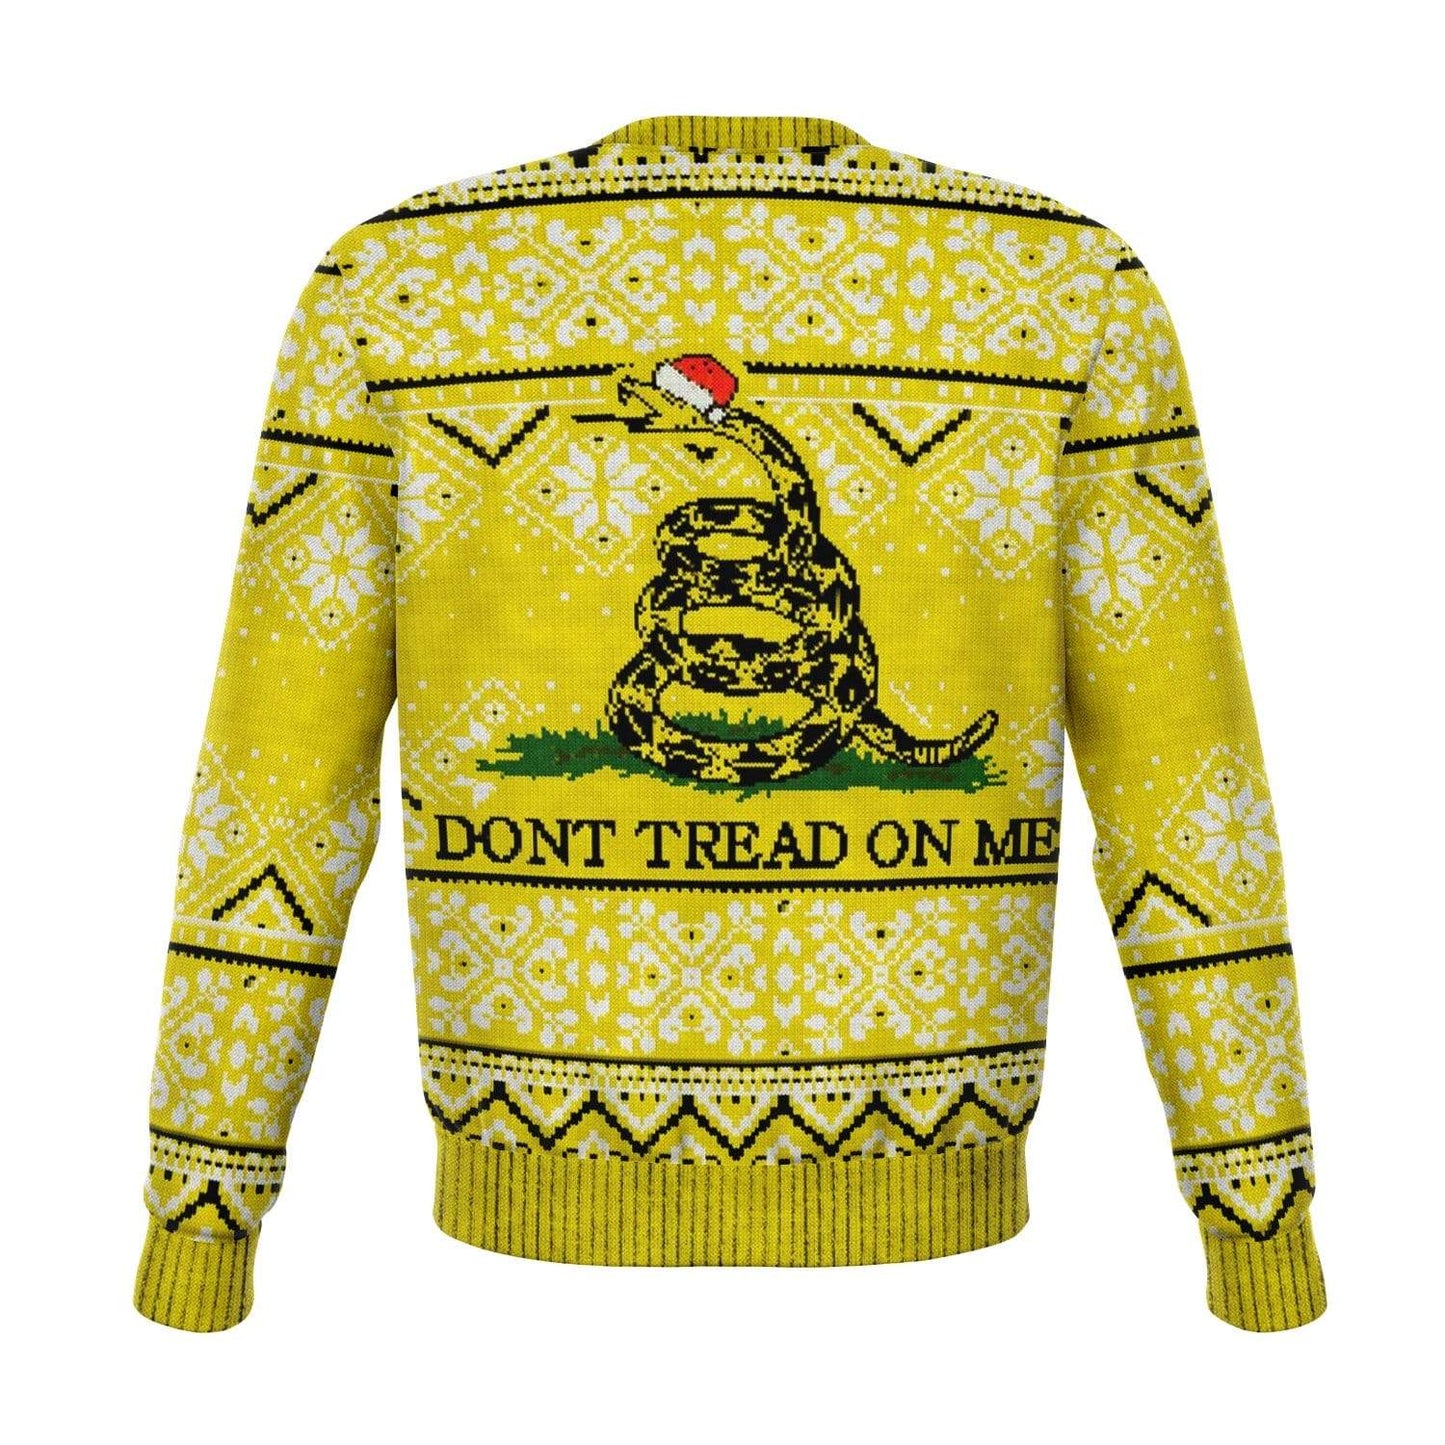 Don't Tread On Me - Funny Ugly Republican Christmas Sweater (Sweatshirt)